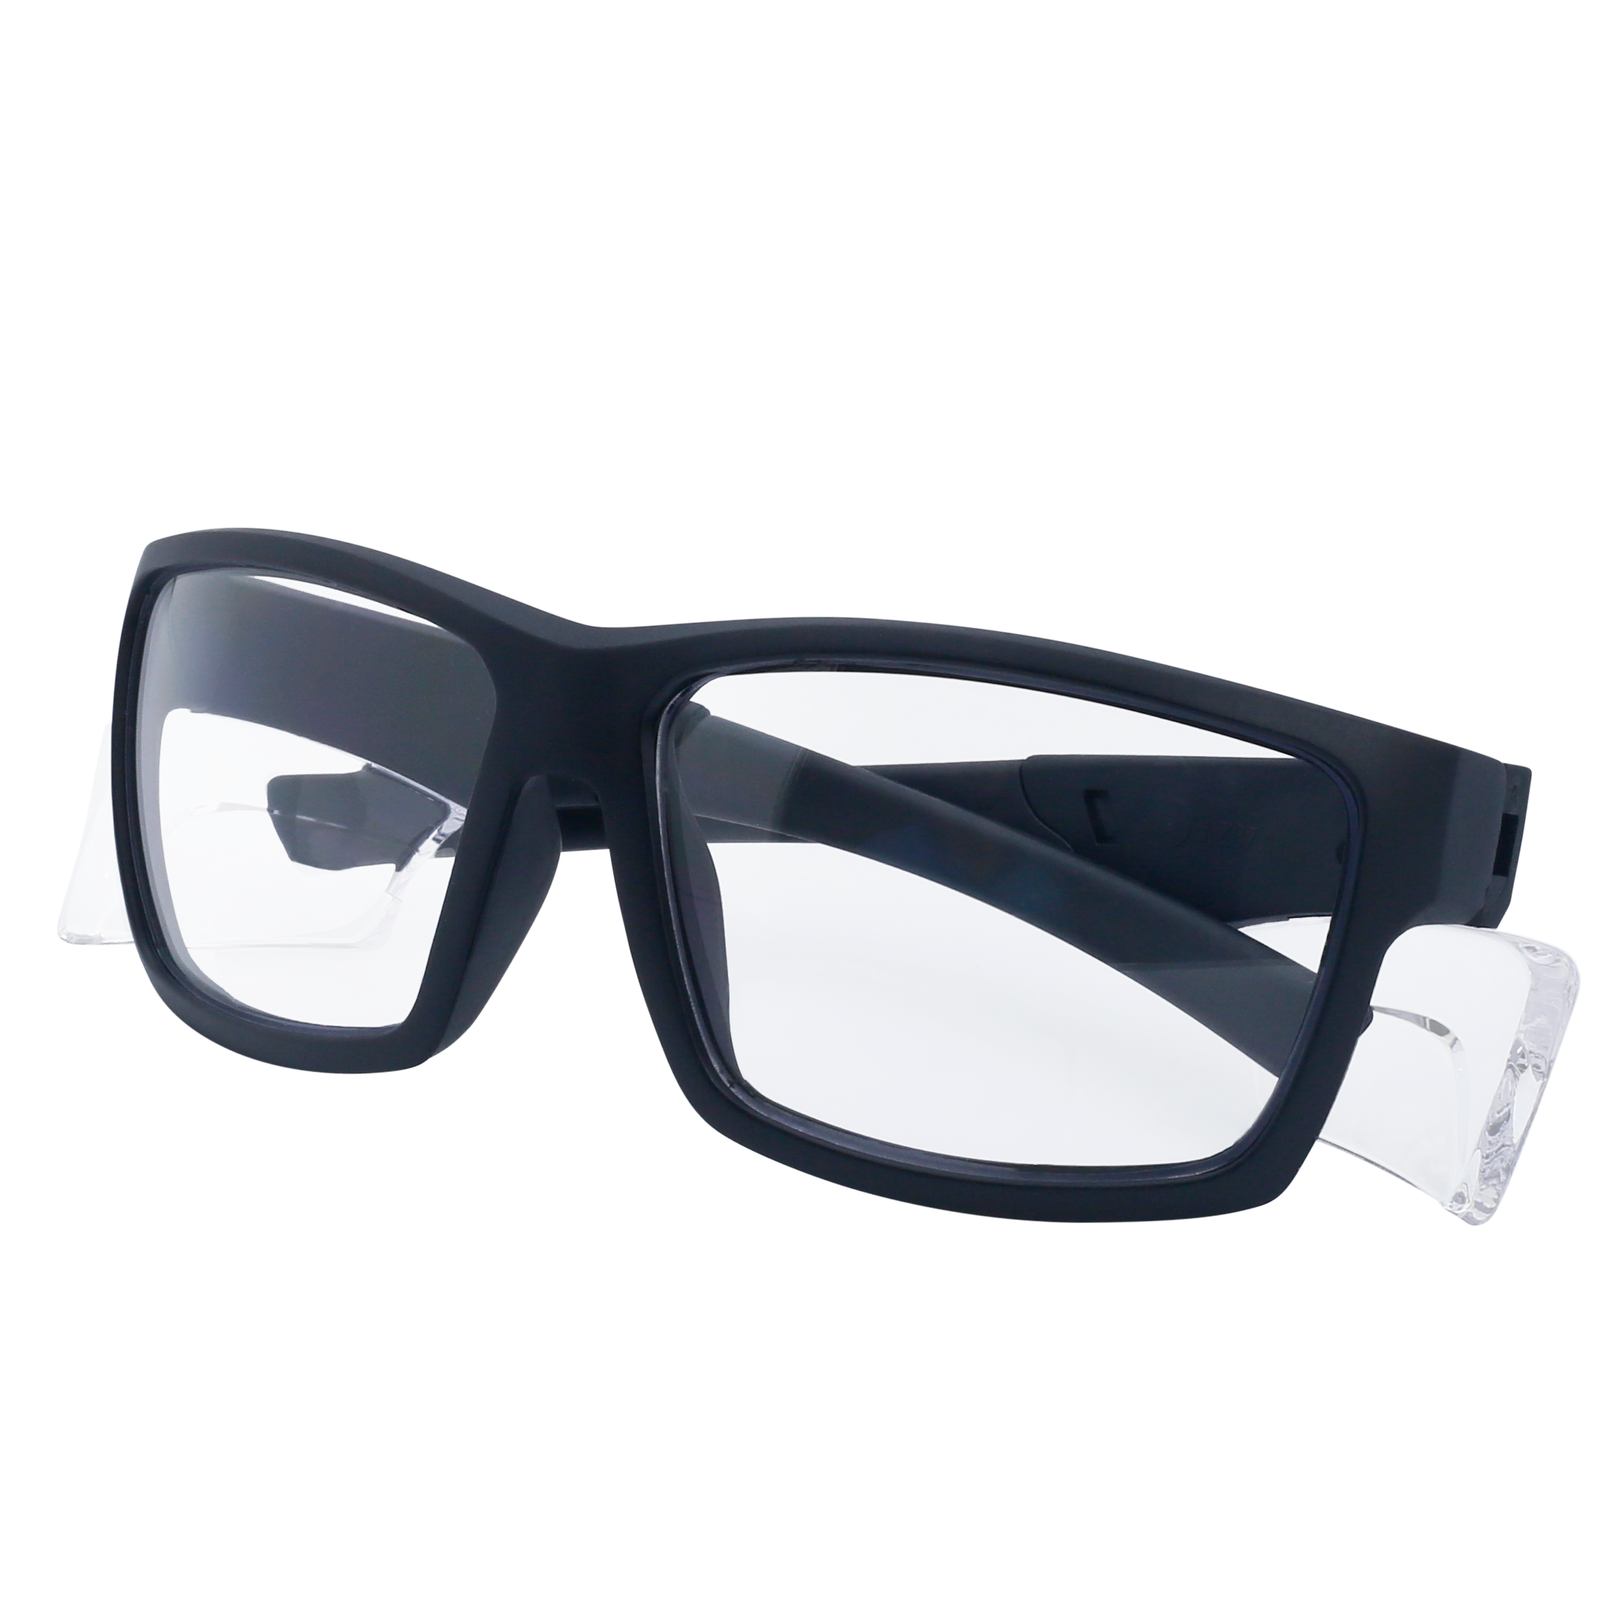 Image shows a diagonal view of a JORESTECH safety Glass with clear side shield for high impact protection with the temples closed.. These safety glasses with clear side shields  are ANSI and have black frame and clear polycarbonate lenses. The background of the image is white